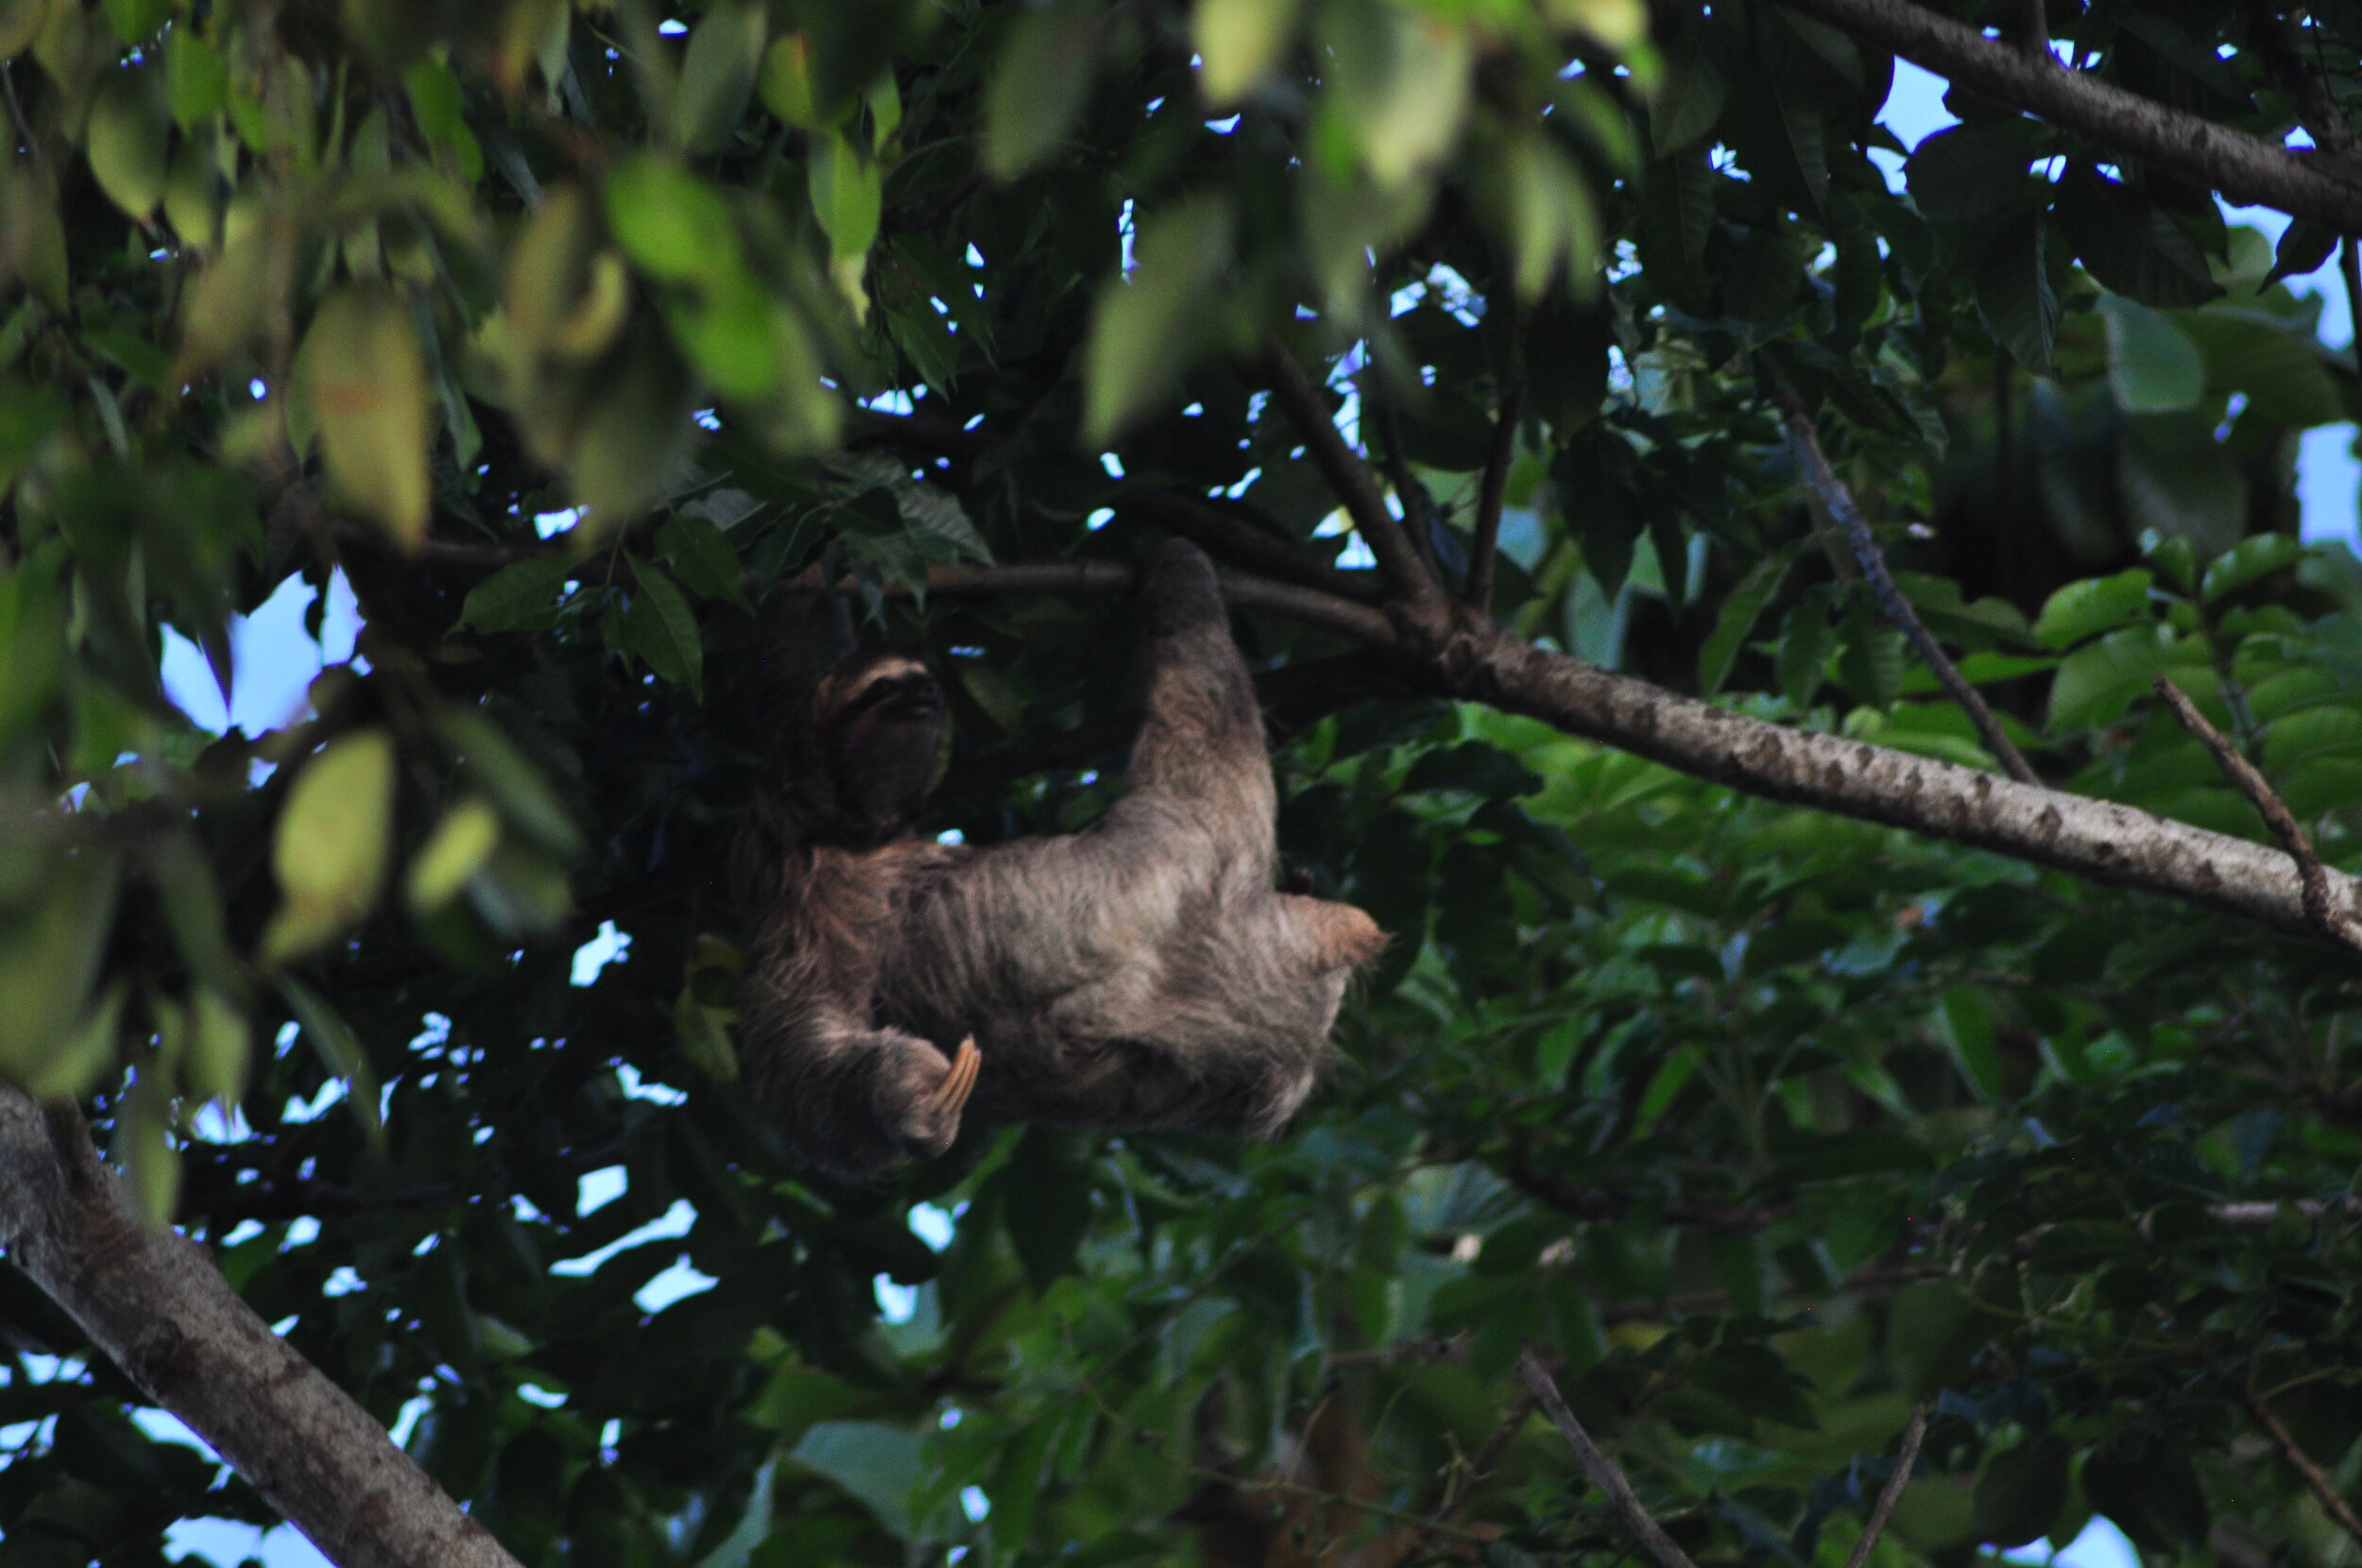 Day 3: Sloth spotted near the rivermouth